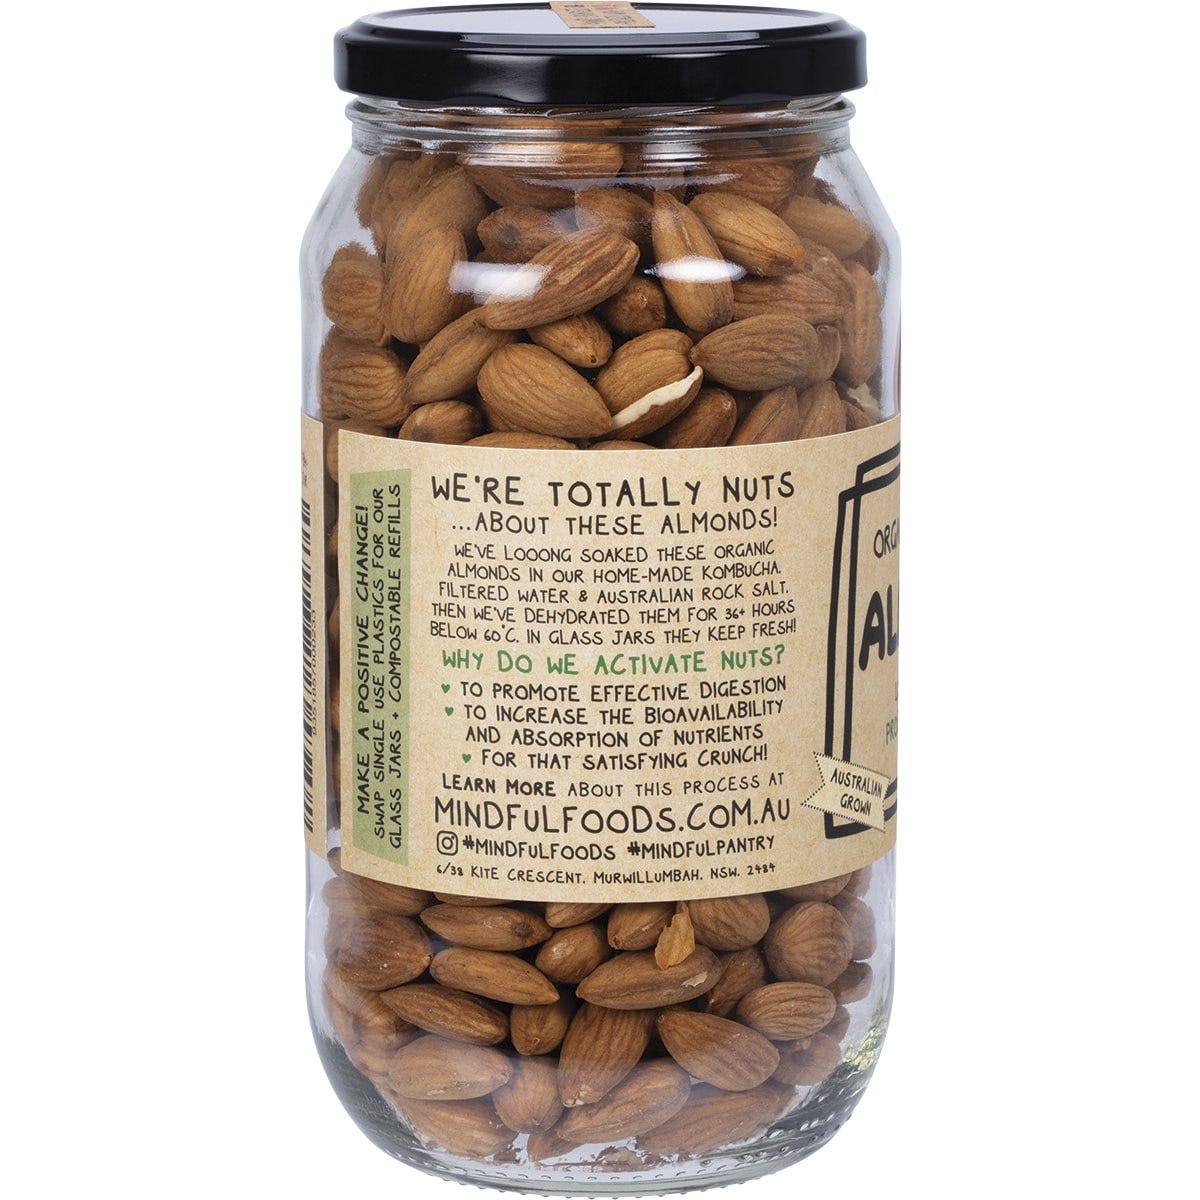 Mindful Foods Almonds Organic & Activated